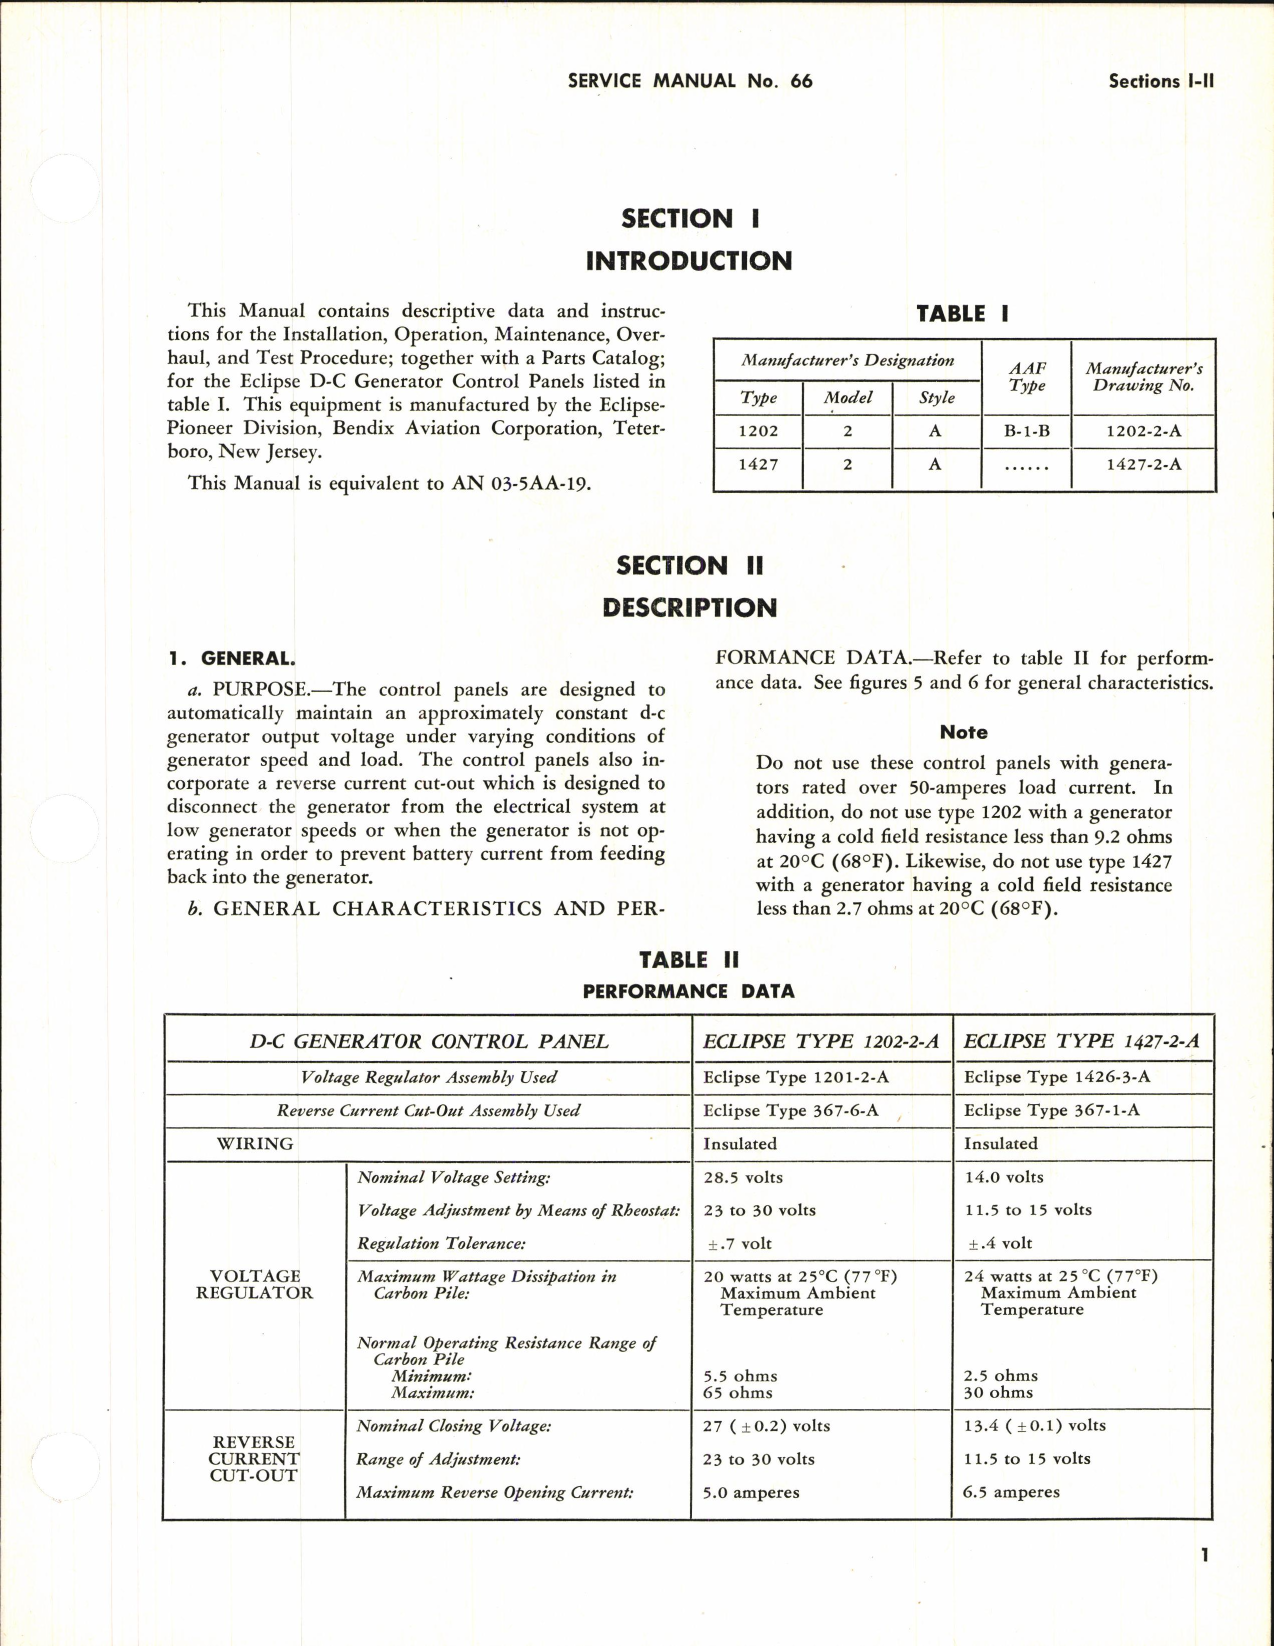 Sample page 5 from AirCorps Library document: Service Manual for D-C Generator Control Panel Type 1202 and 1427, Model 2, Style A